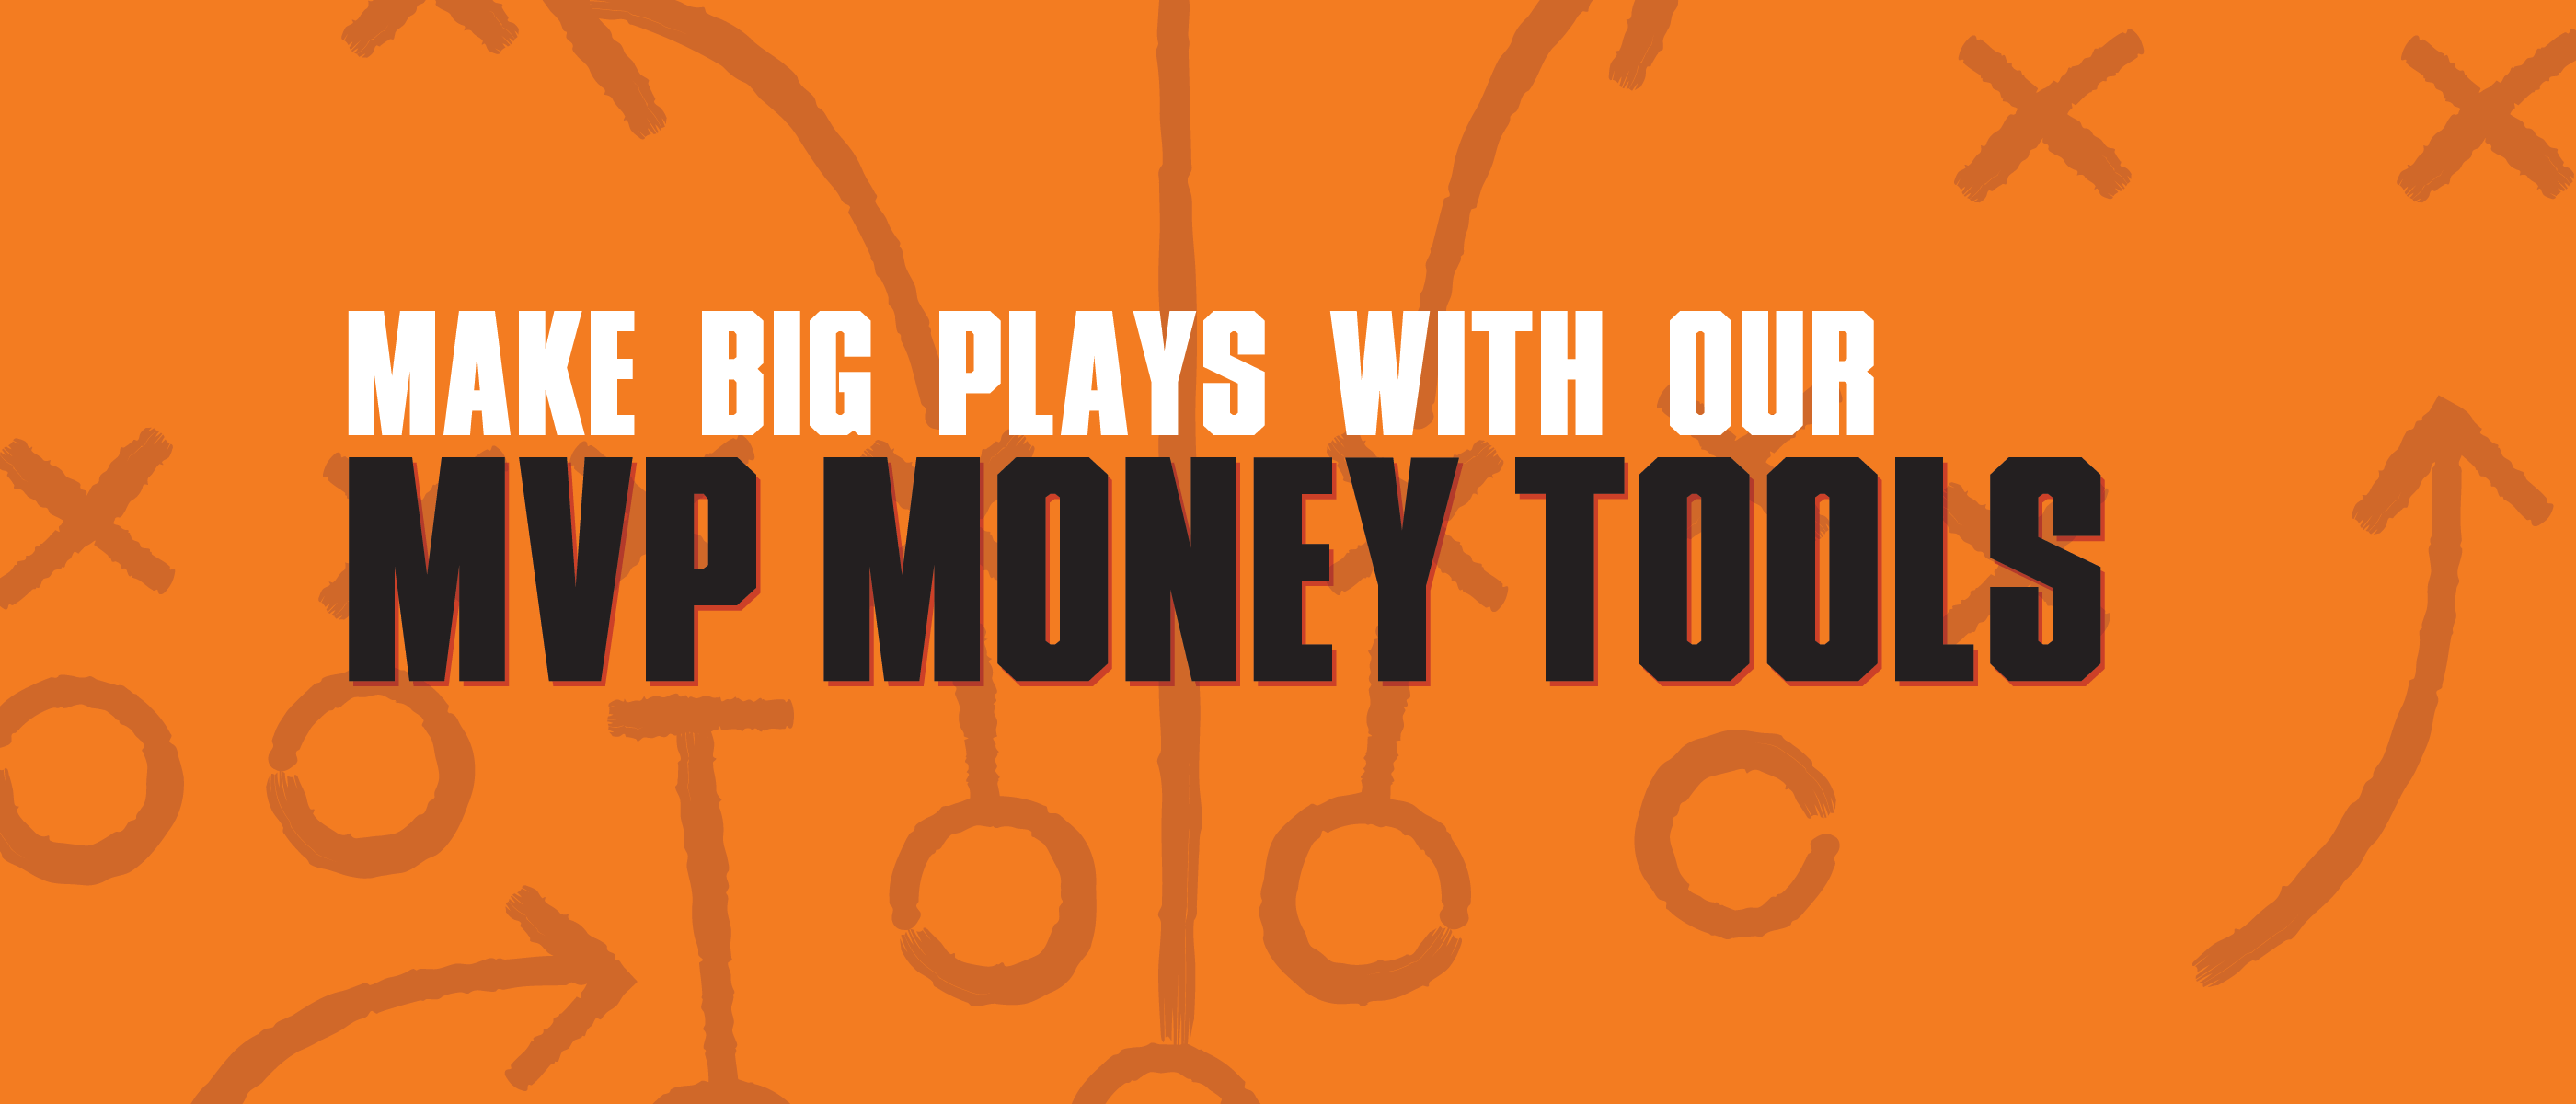 Make big plays with our MVP money tools.